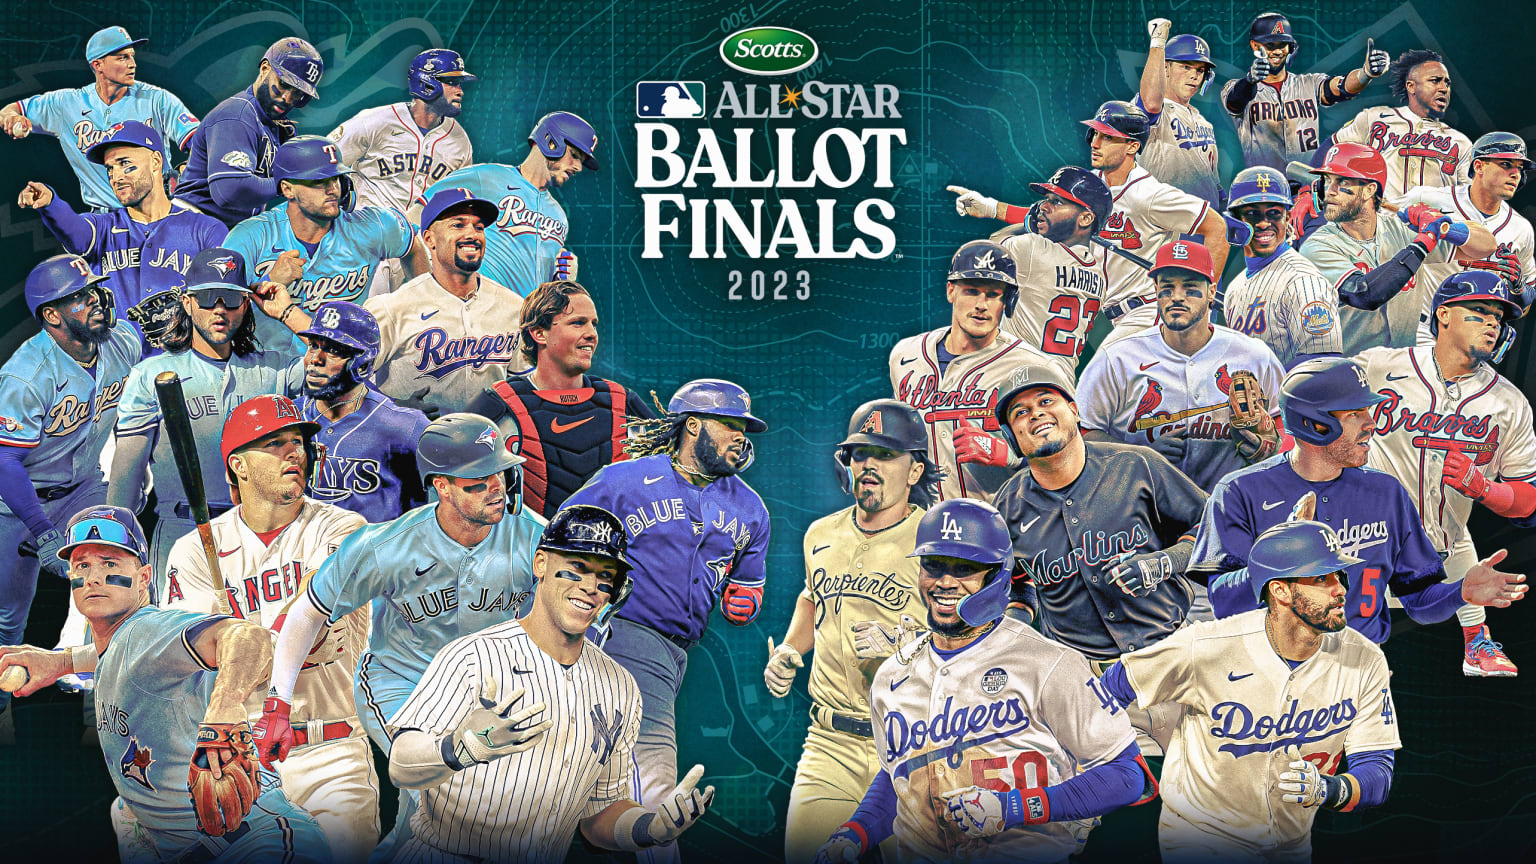 A photo illustration of all the All-Star ballot finalists